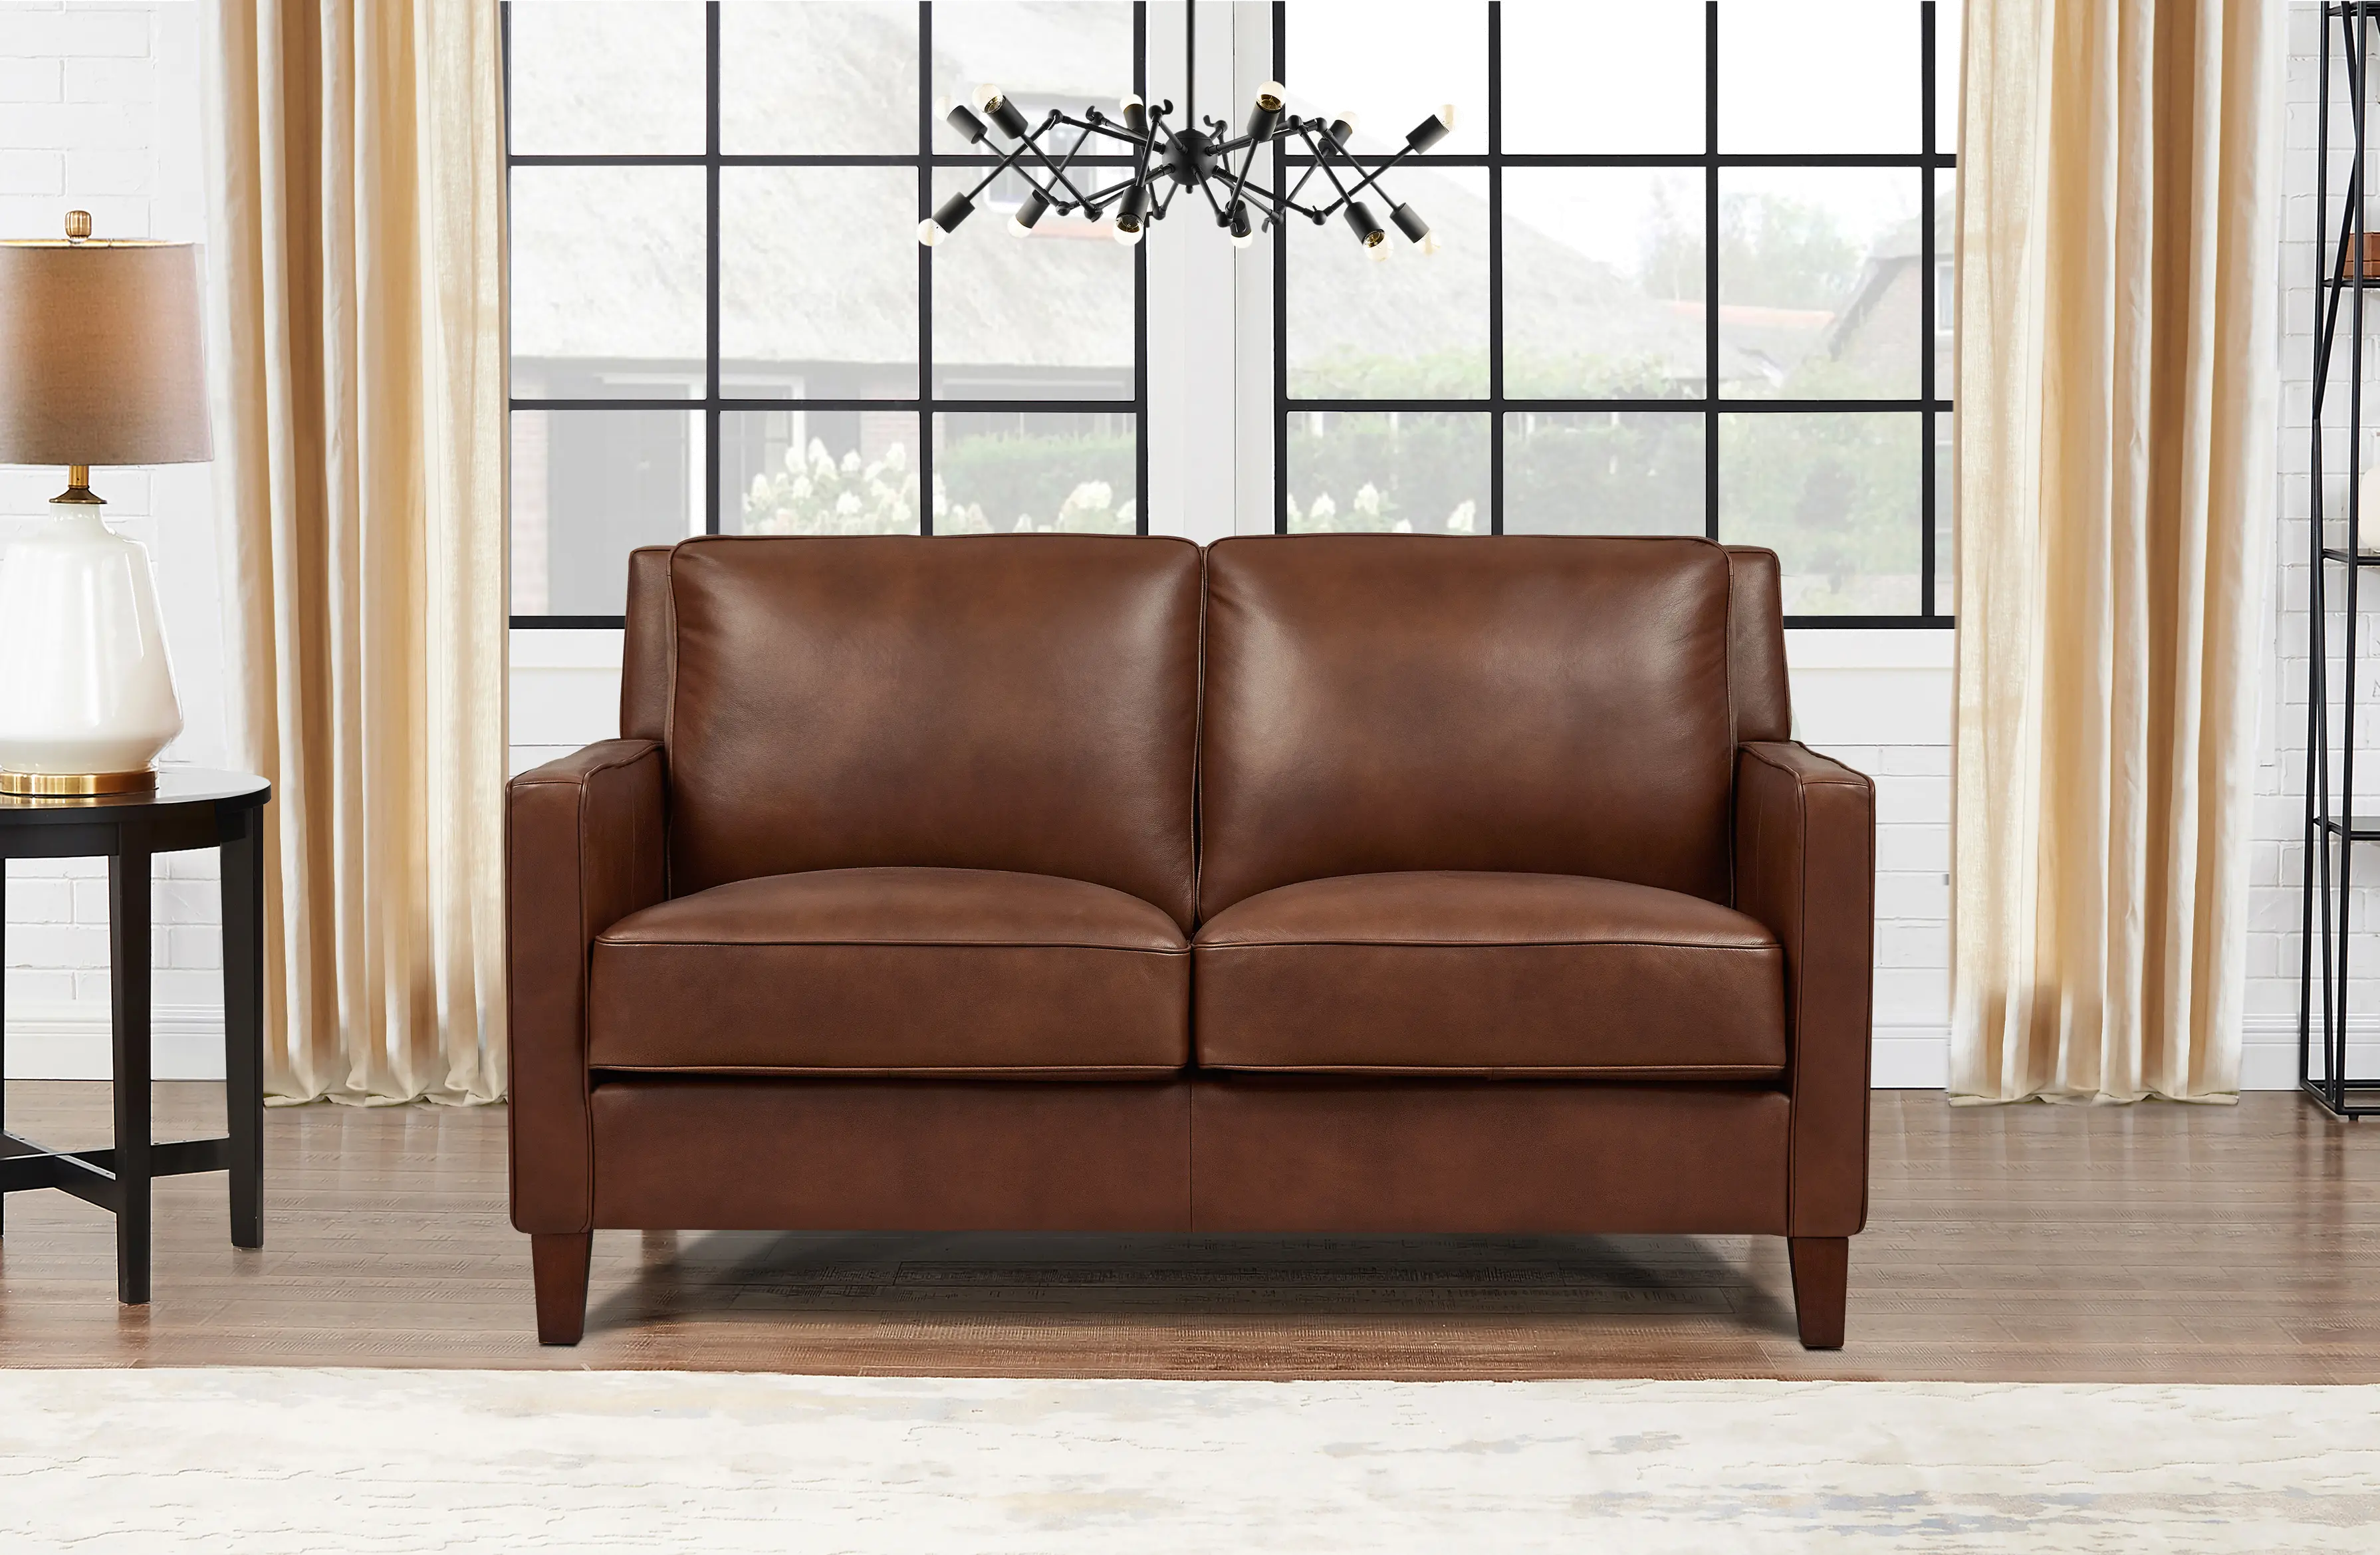 6571-20-1566H New Haven Tobacco Brown Leather Loveseat - Amax Le sku 6571-20-1566H